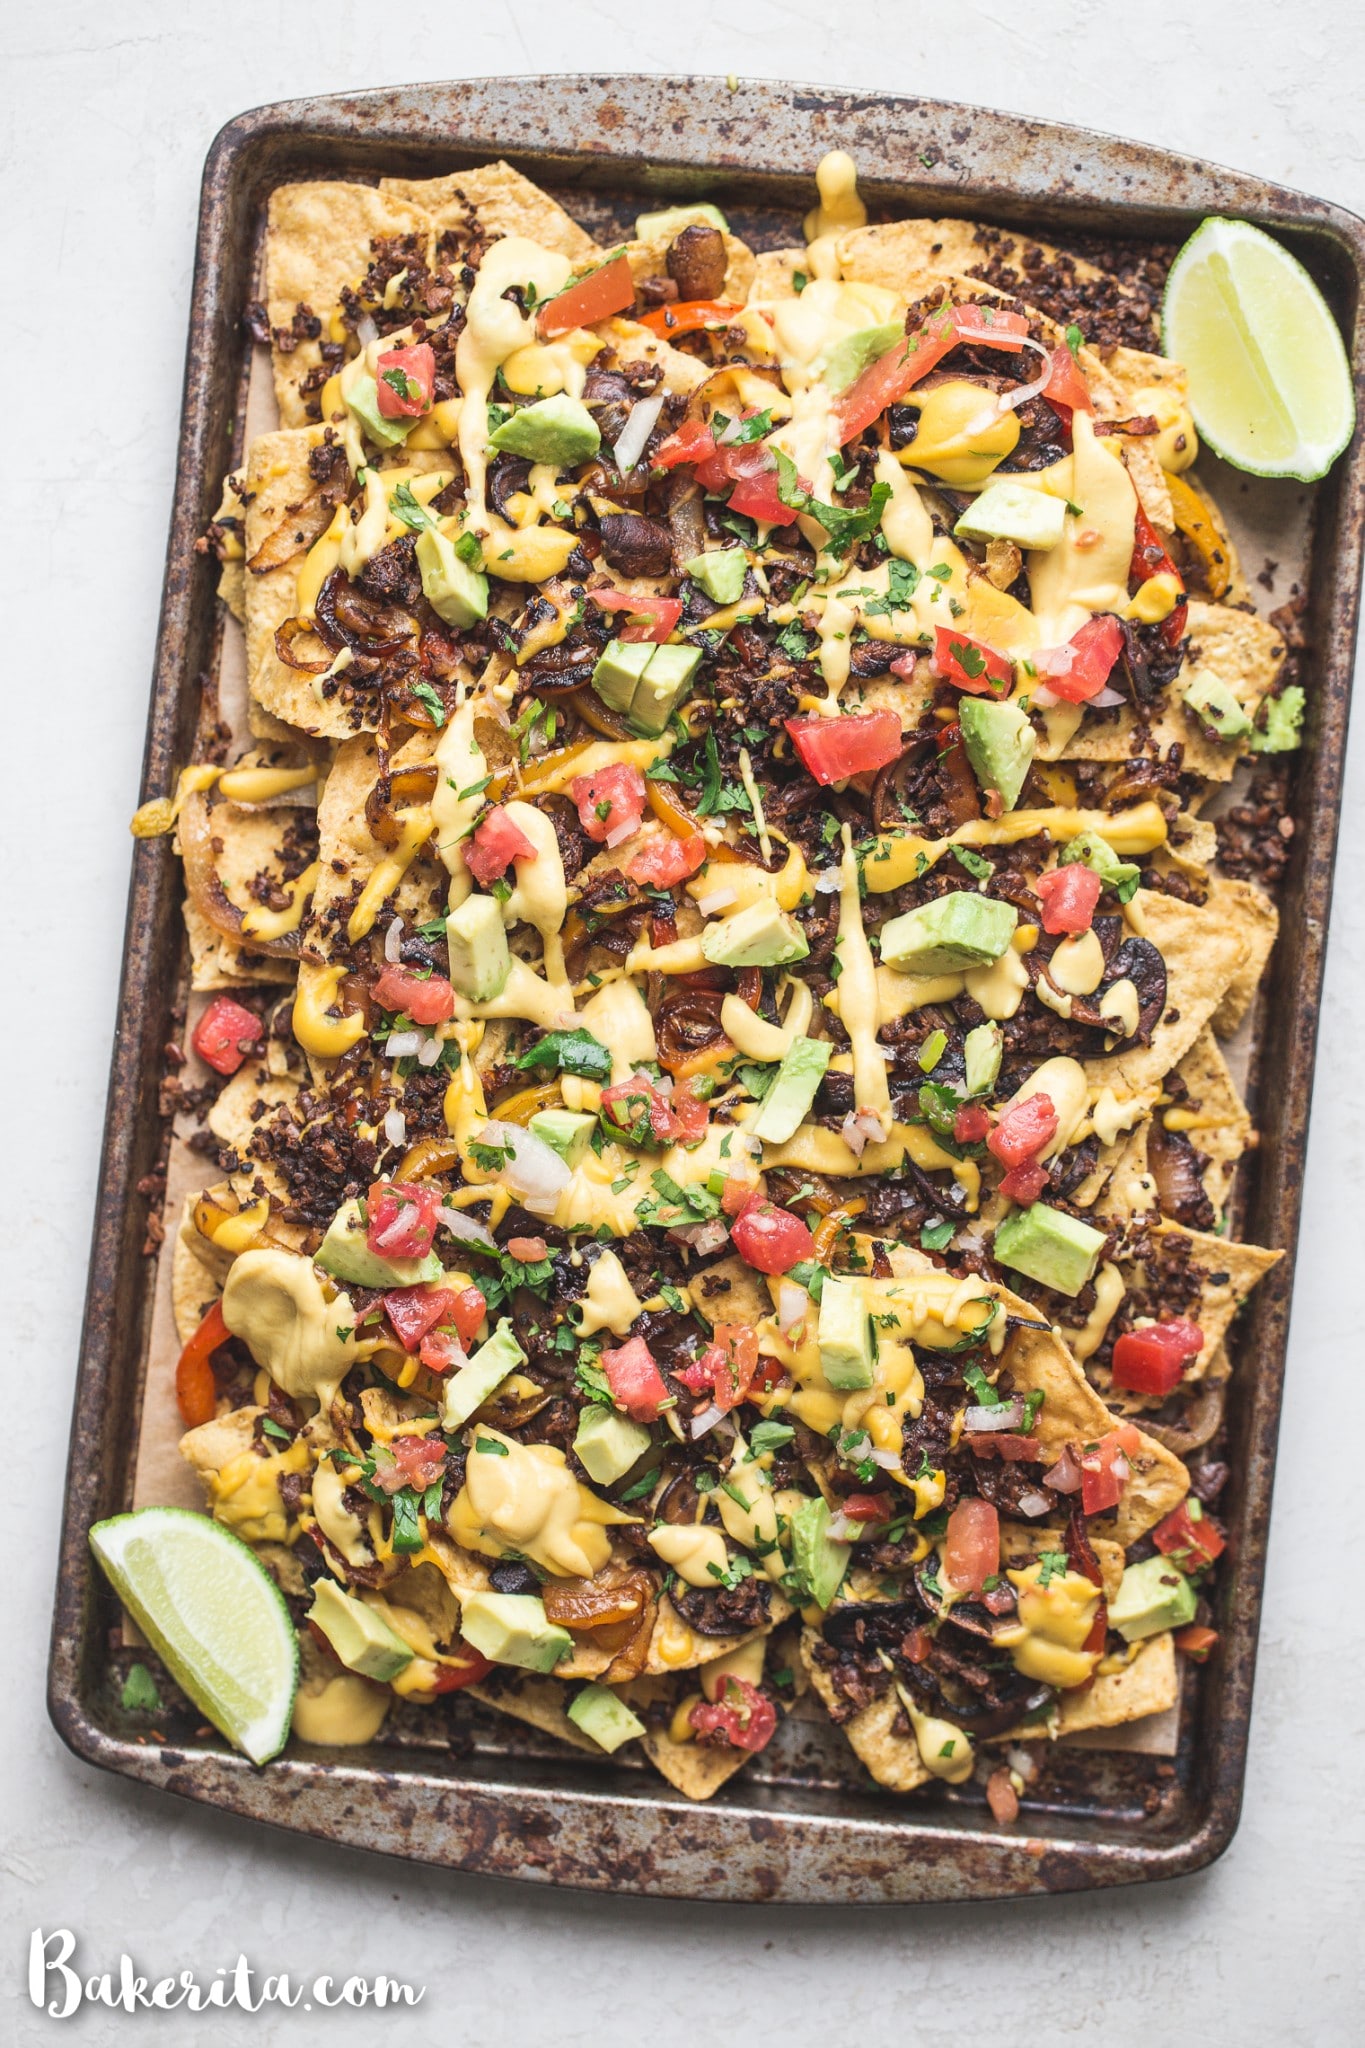 These are the BEST Vegan Nachos I've ever had! They're loaded with sauteed vegetables, vegan taco meat, pico de gallo, avocado, cilantro, and topped with a ton of vegan cheese sauce. They're the perfect cheesy snack for game day.